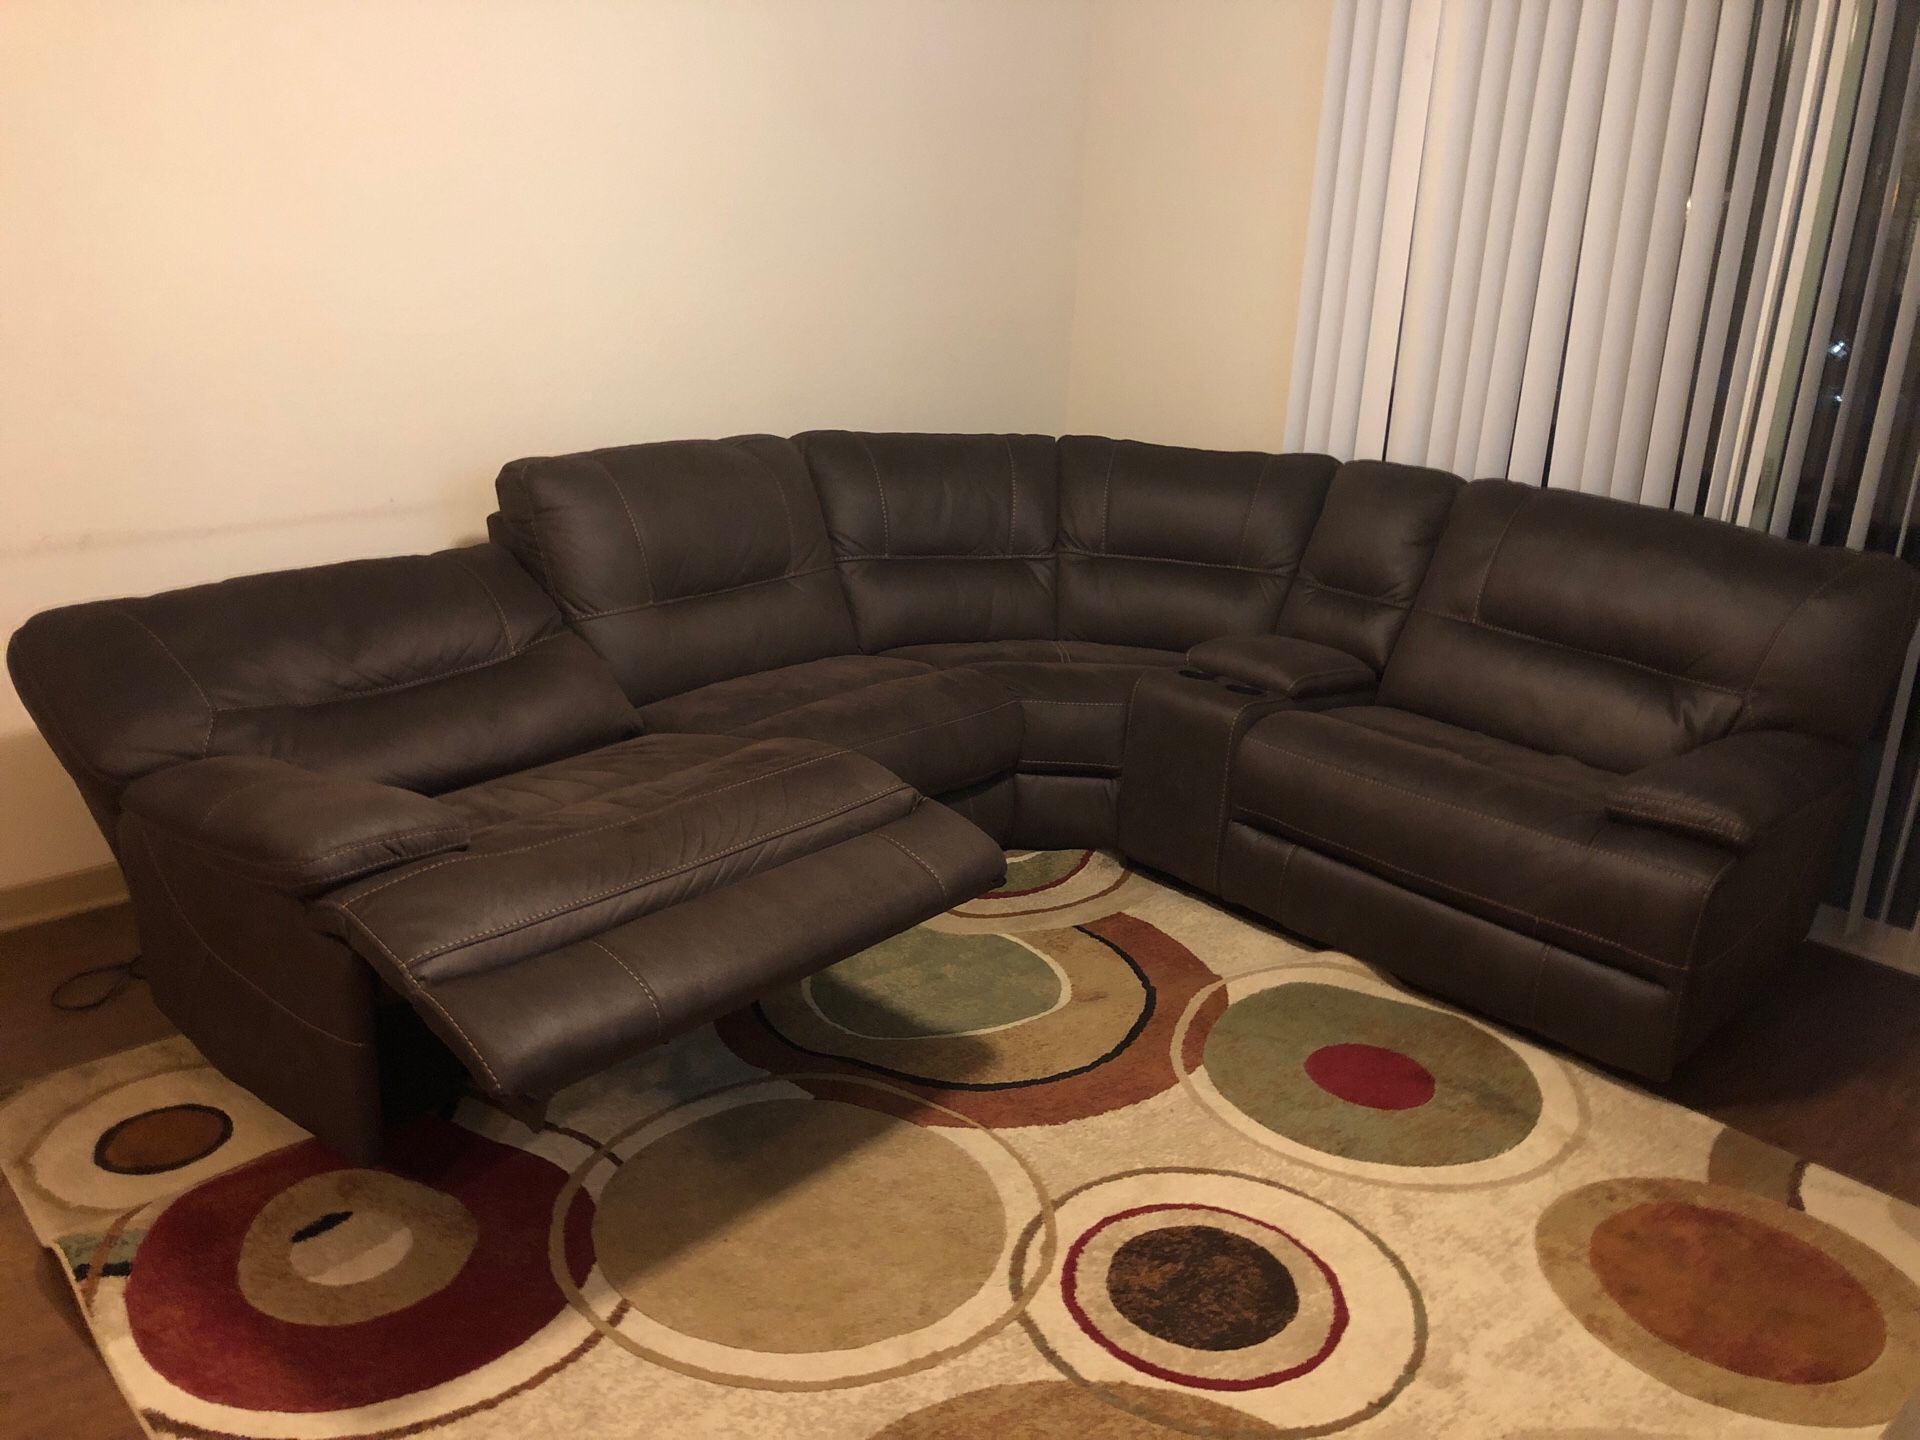 PRACTICALLY NEW SECTIONAL COUCH WITH TWO ELECTRIC RECLINERS